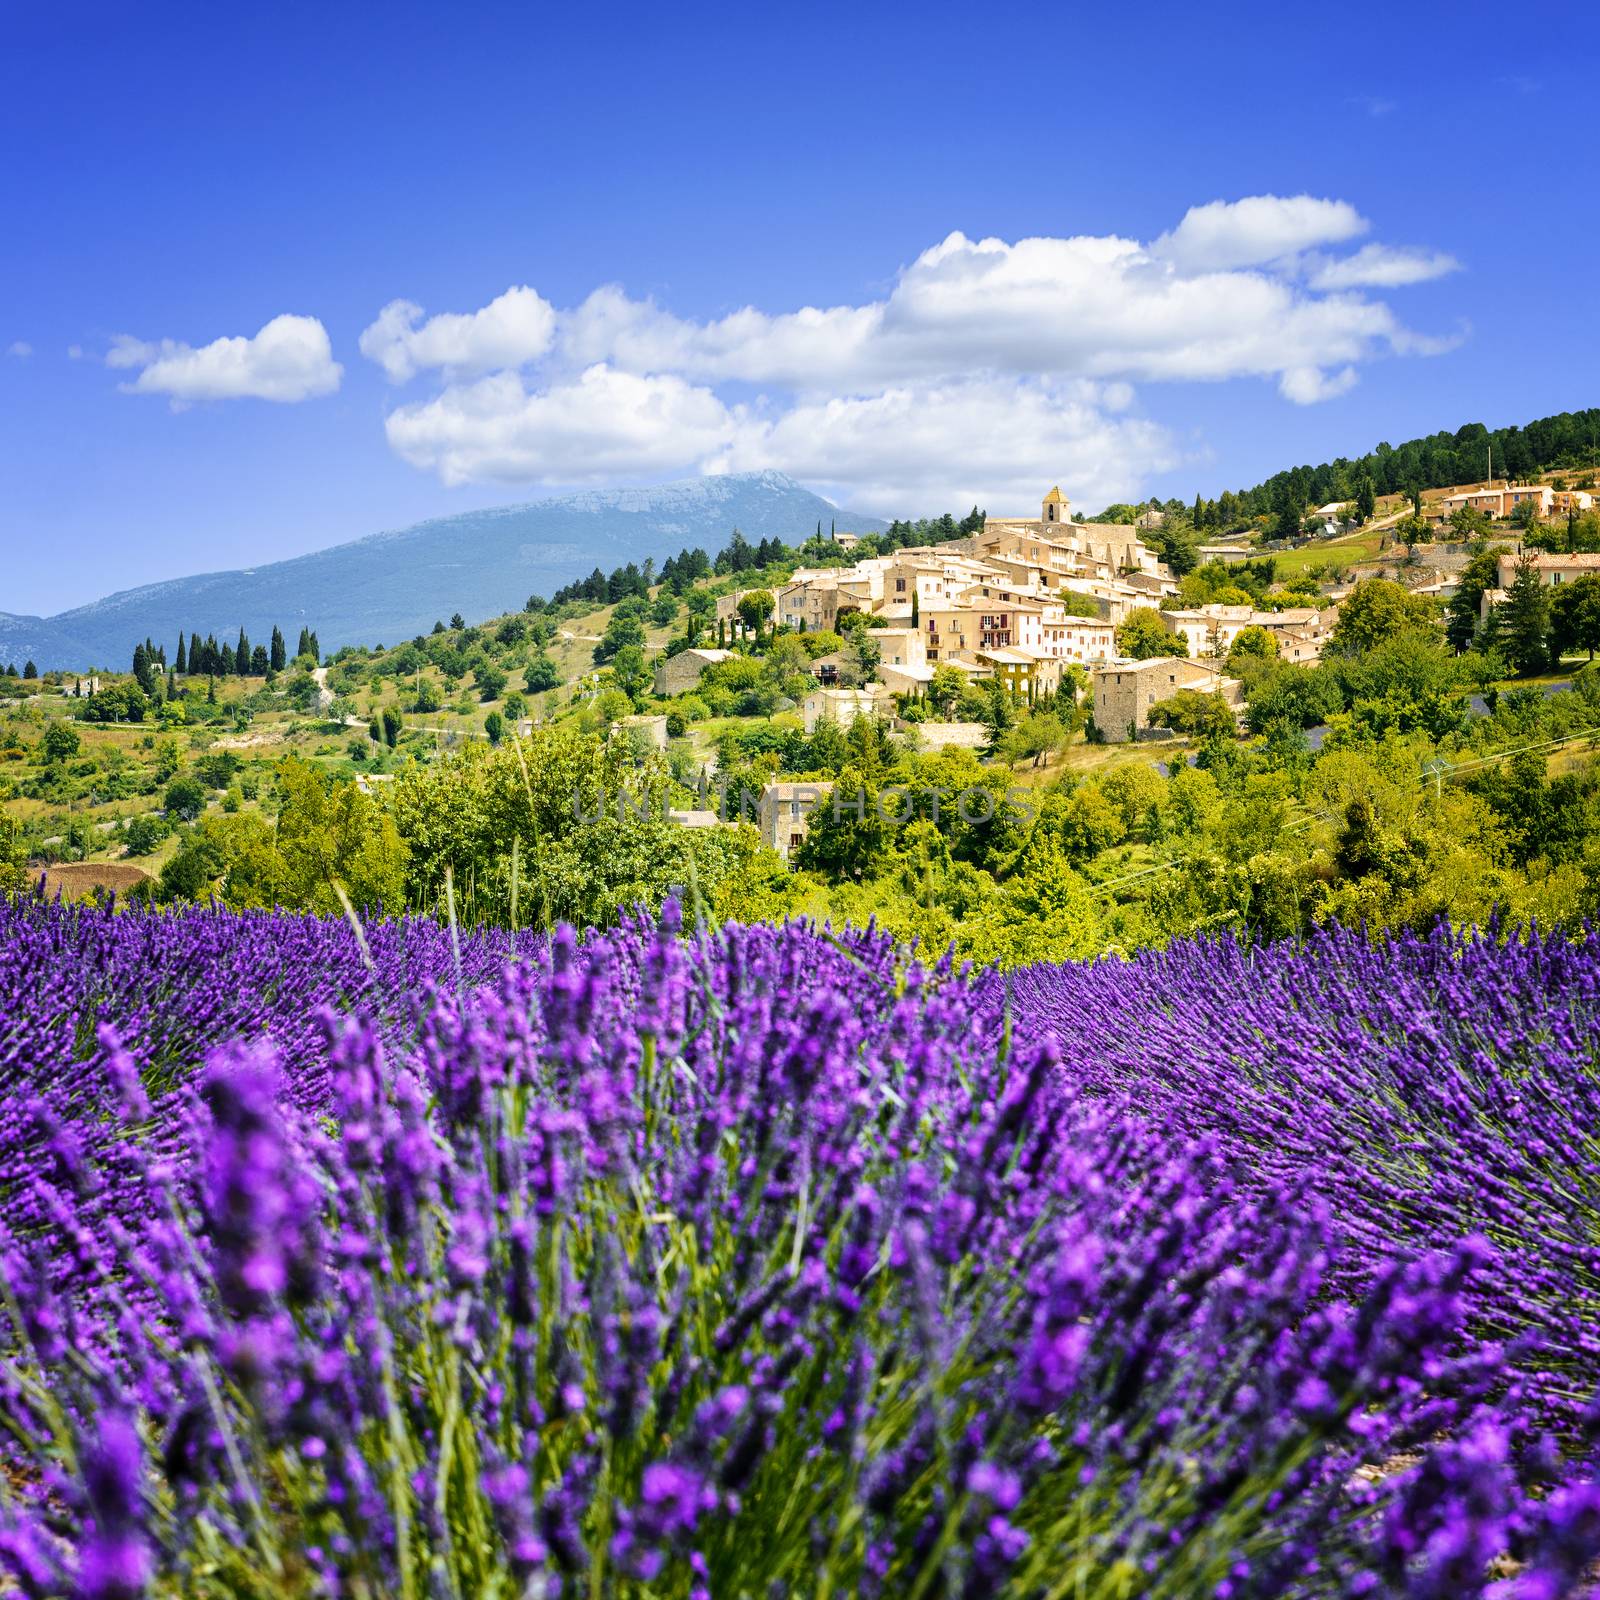 Aurel little village  in south of france with a lavender field in front of it